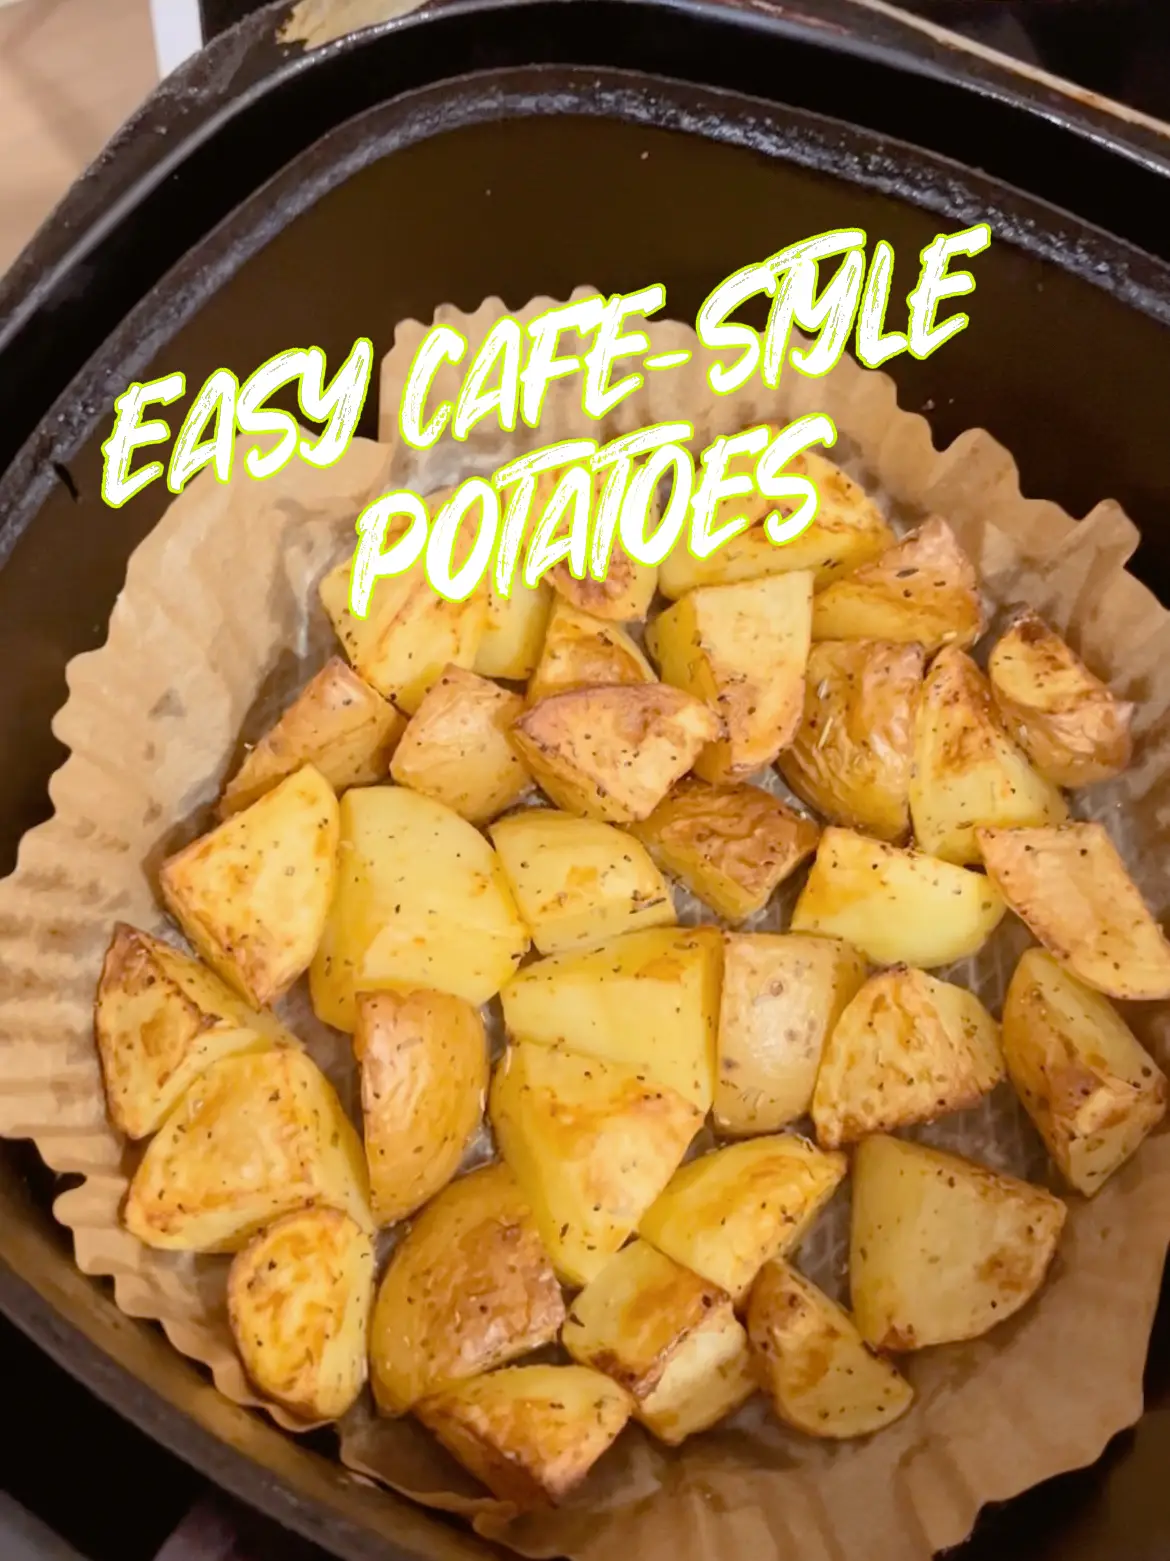 🥔🤤SIMPLE CAFE-STYLE POTATOES! 's images